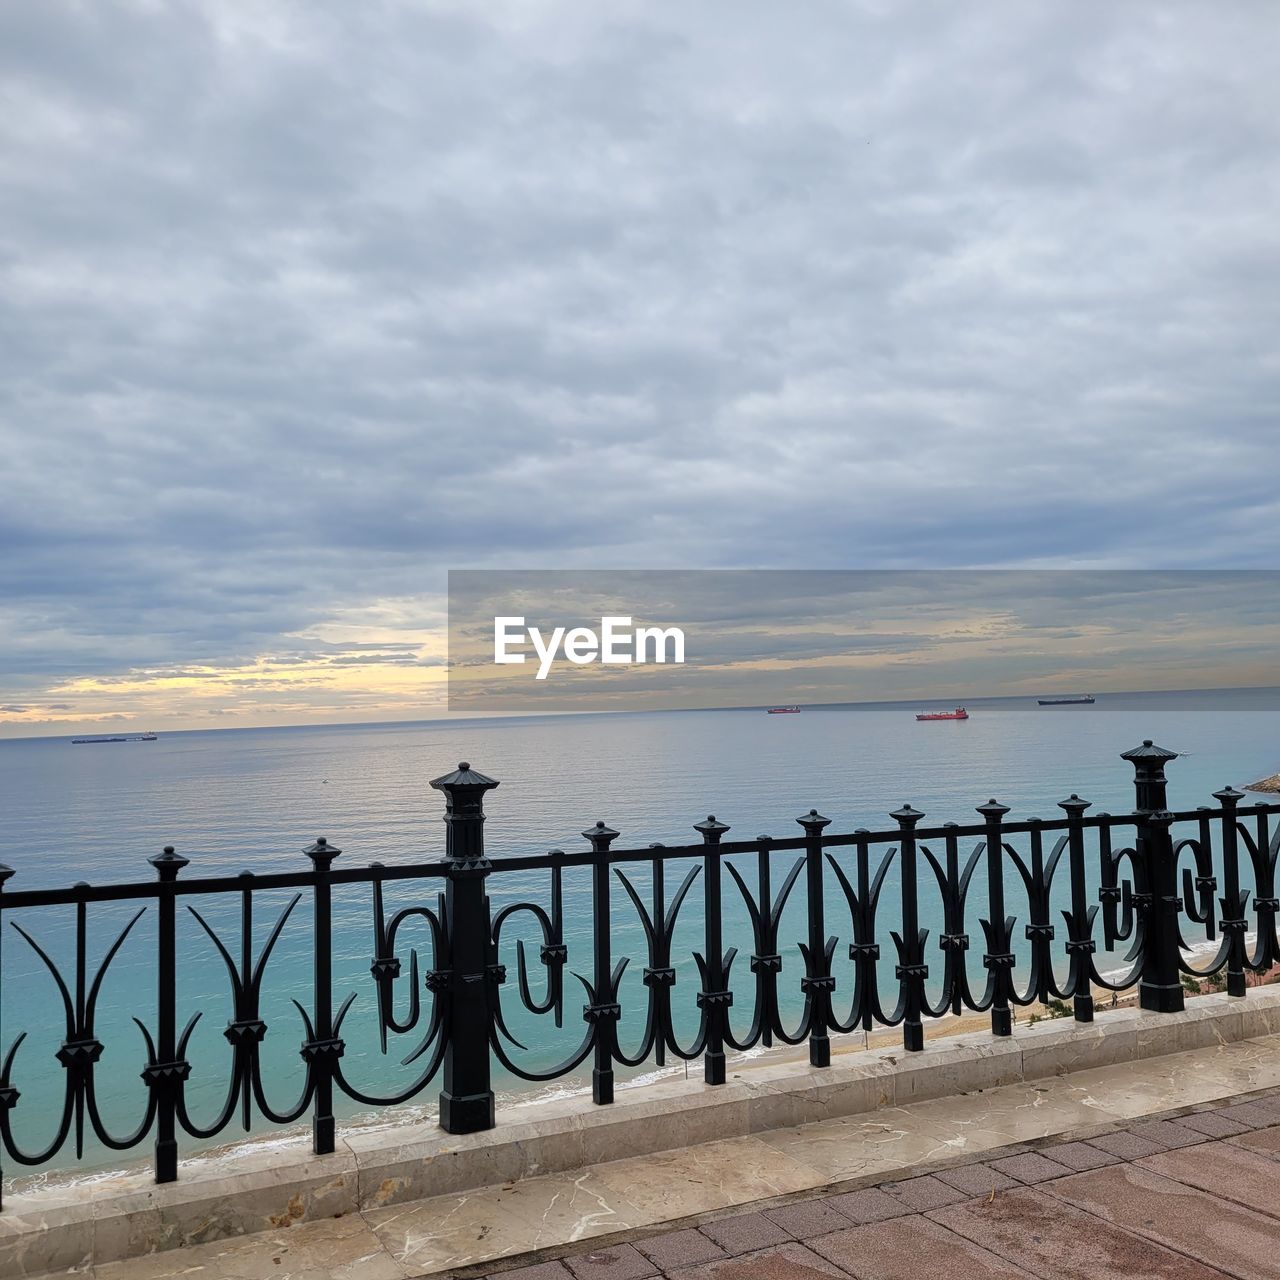 sky, water, sea, cloud, railing, nature, architecture, pier, walkway, coast, scenics - nature, horizon over water, beach, beauty in nature, horizon, tranquility, no people, footpath, land, transportation, travel destinations, sunset, boardwalk, ocean, tranquil scene, outdoors, city, travel, built structure, tourism, wood, shore, day, vacation, environment, landscape, idyllic, fence